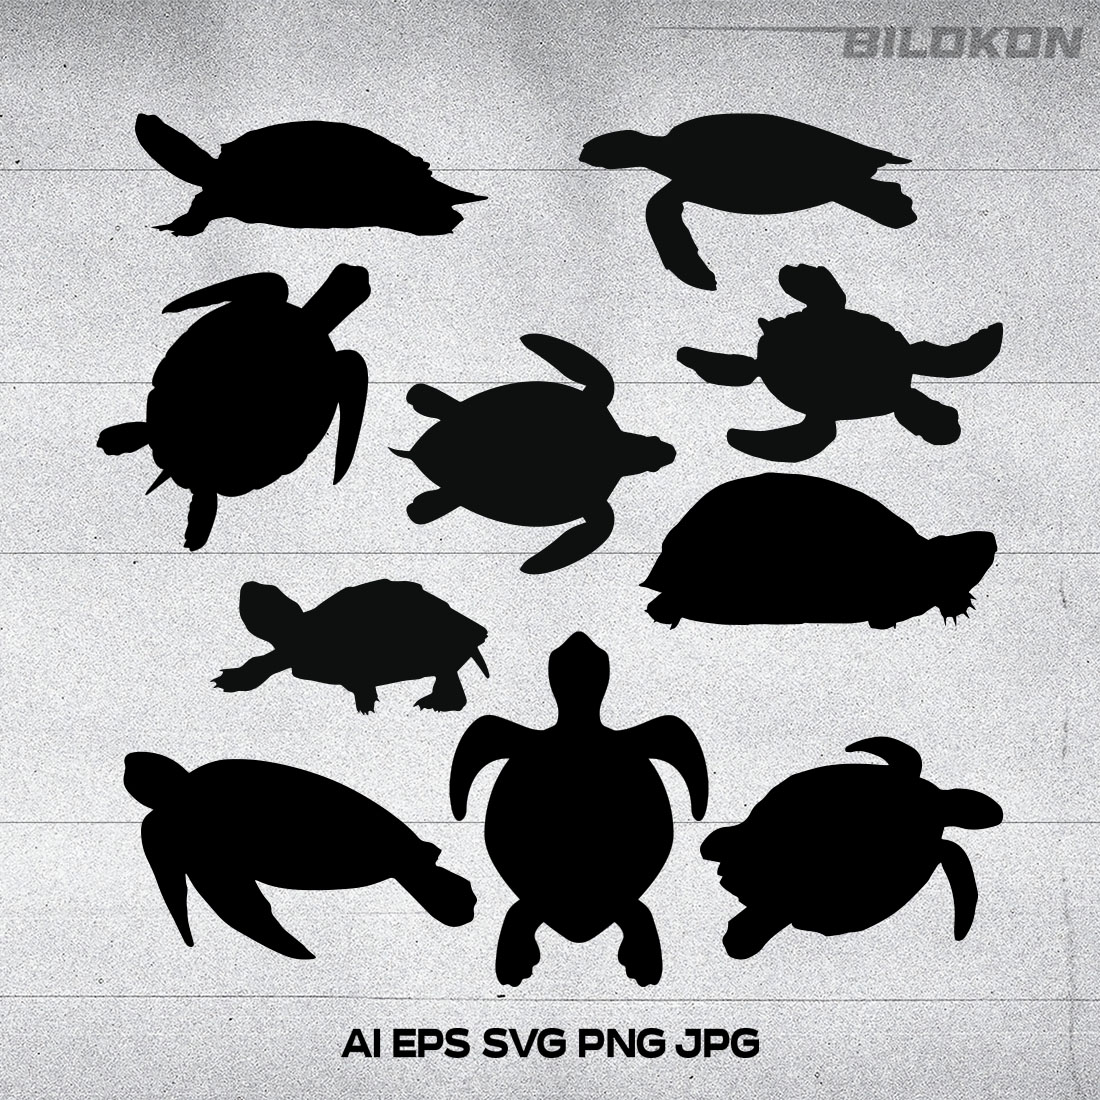 Group of sea turtle silhouettes on a white background.